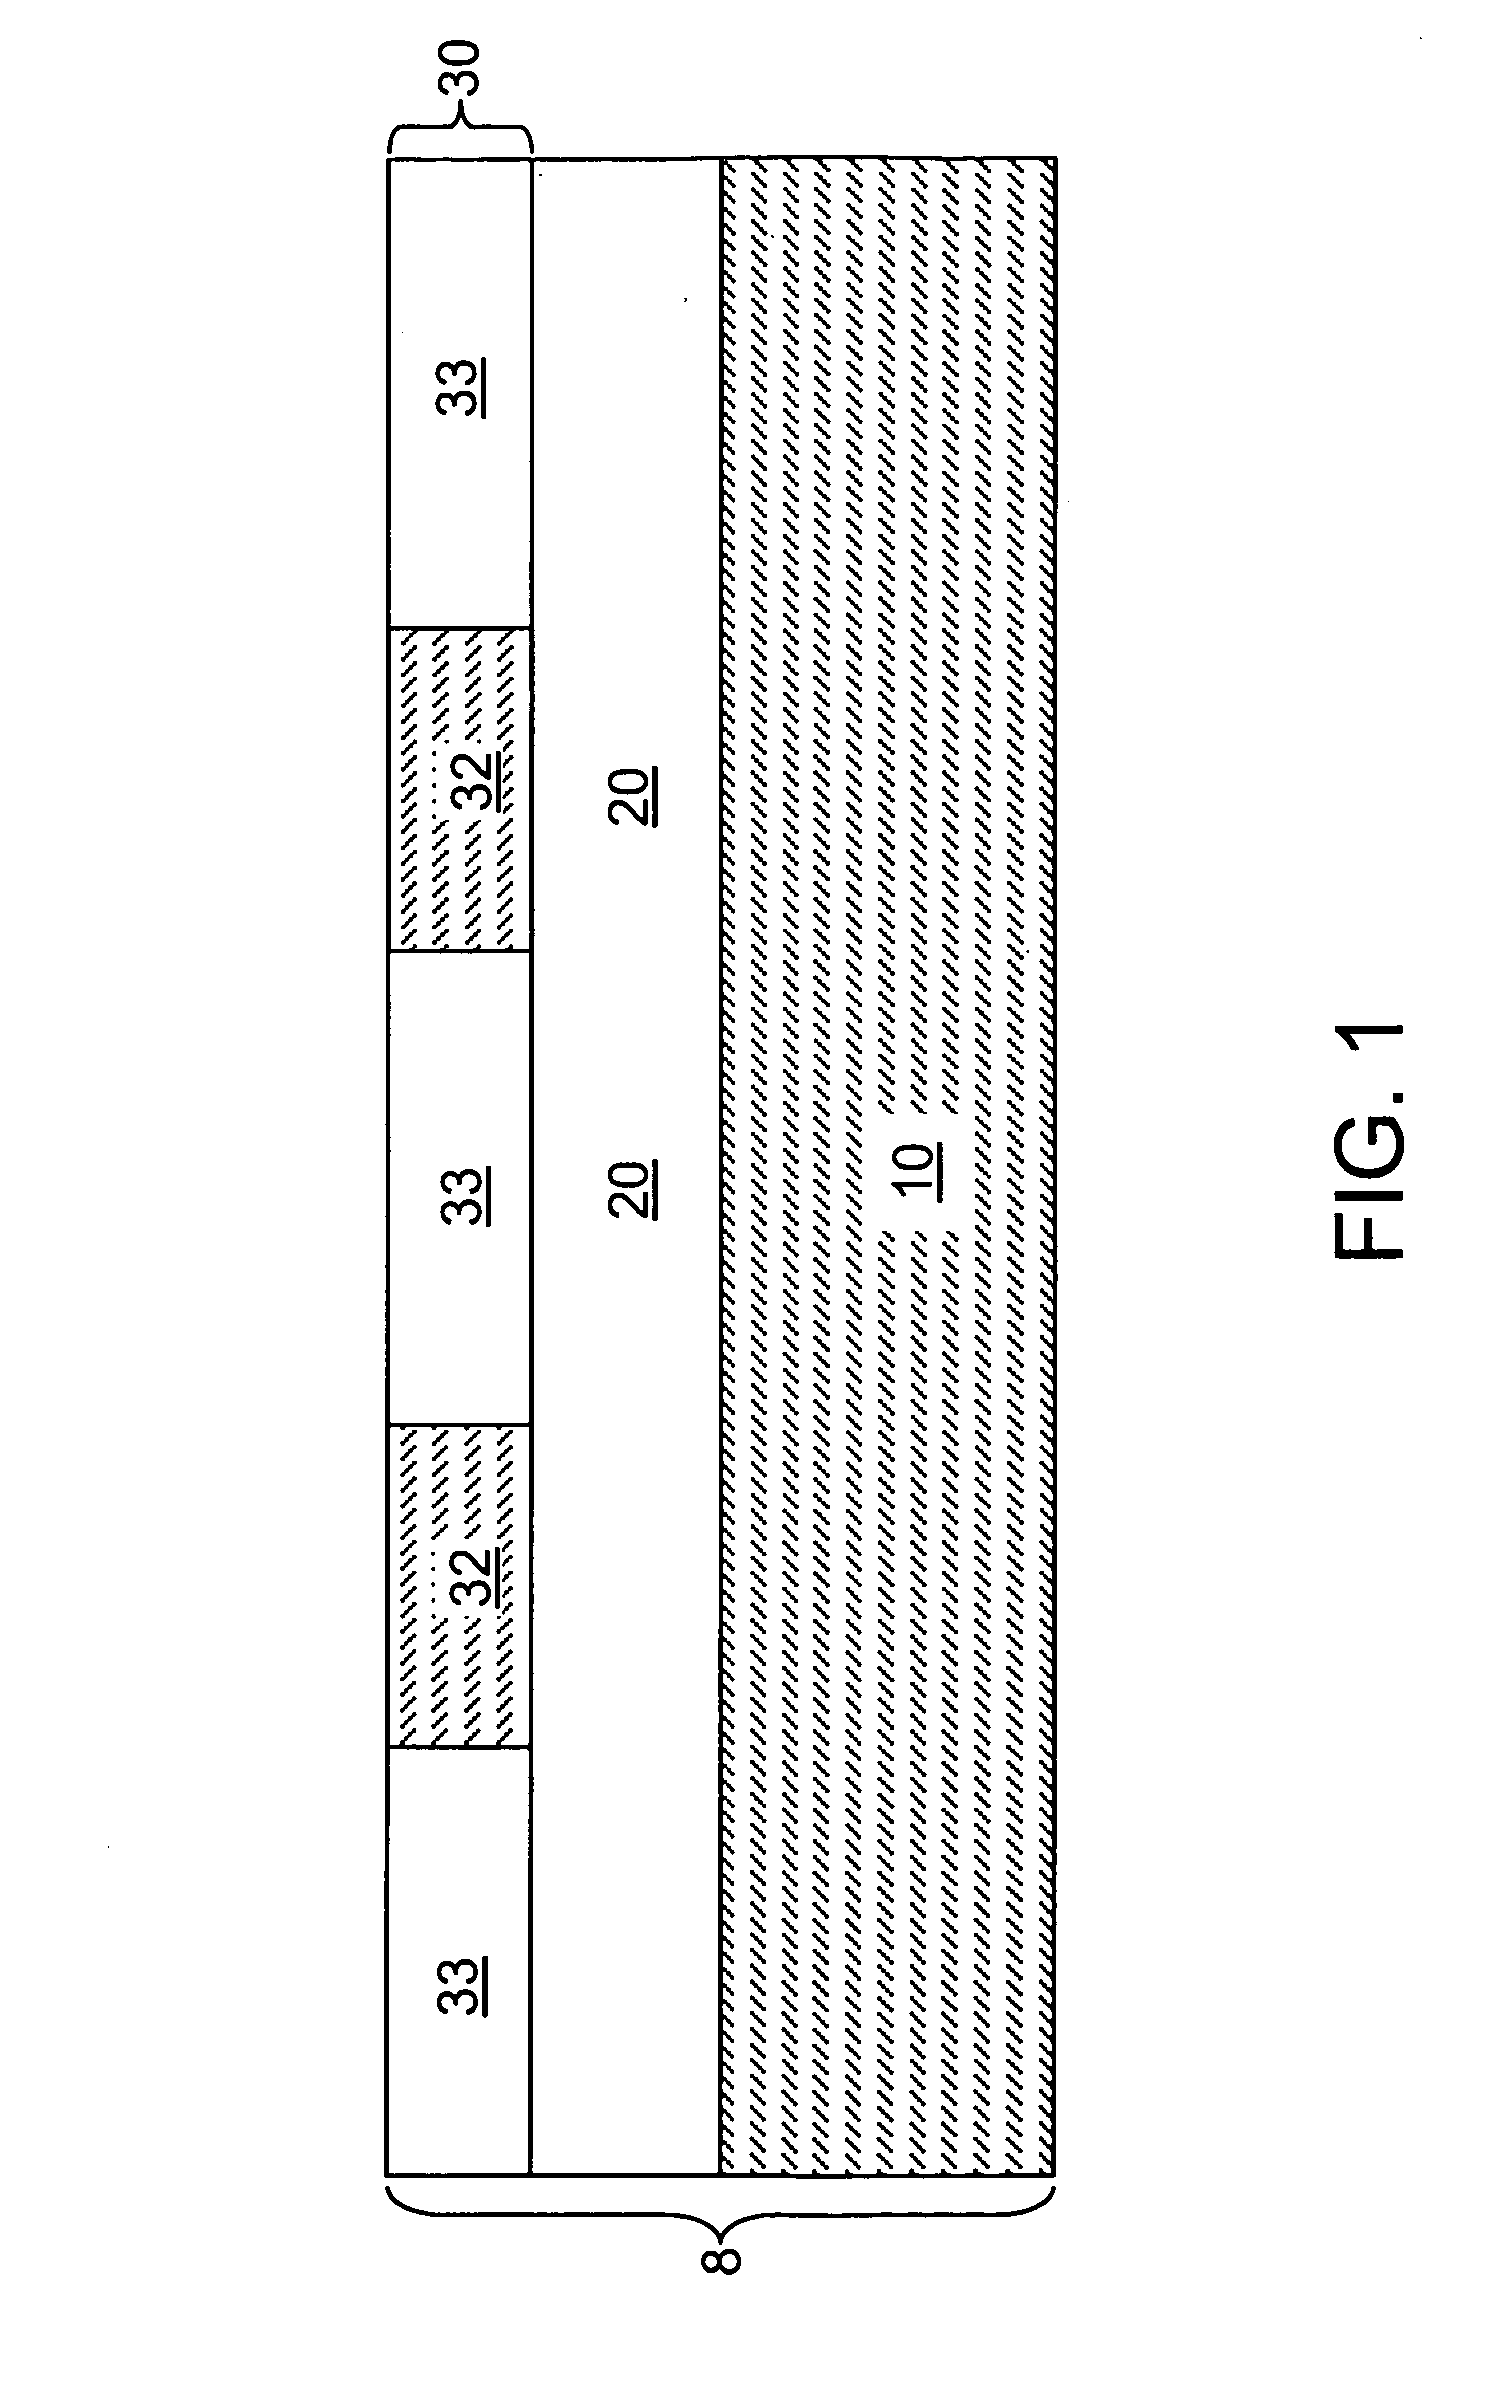 Soi radio frequency switch for reducing high frequency harmonics